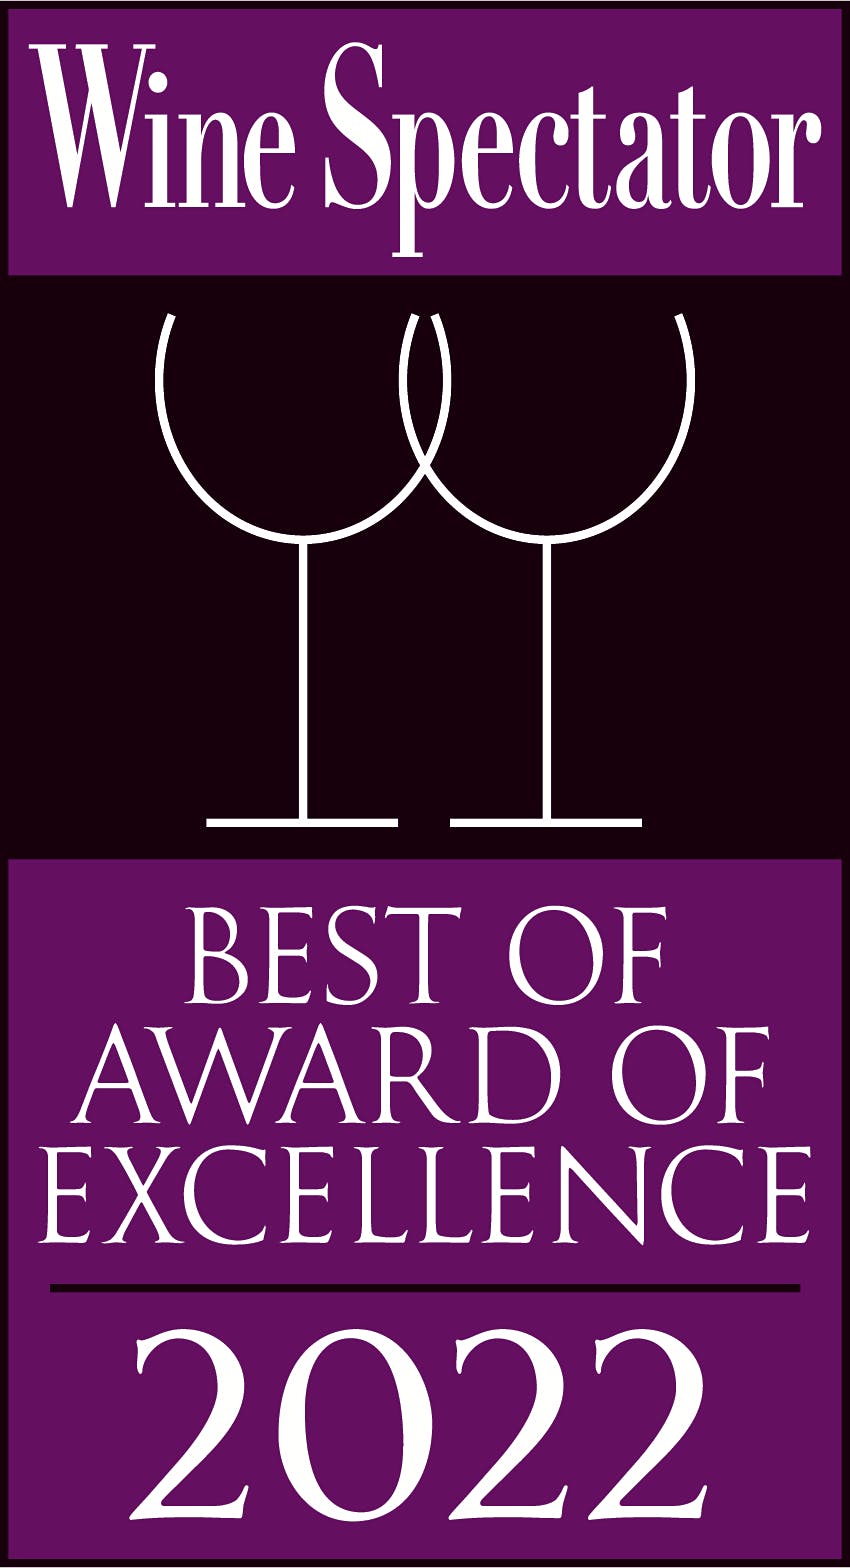 Wine Spectator Best of Award of Excellence 2022